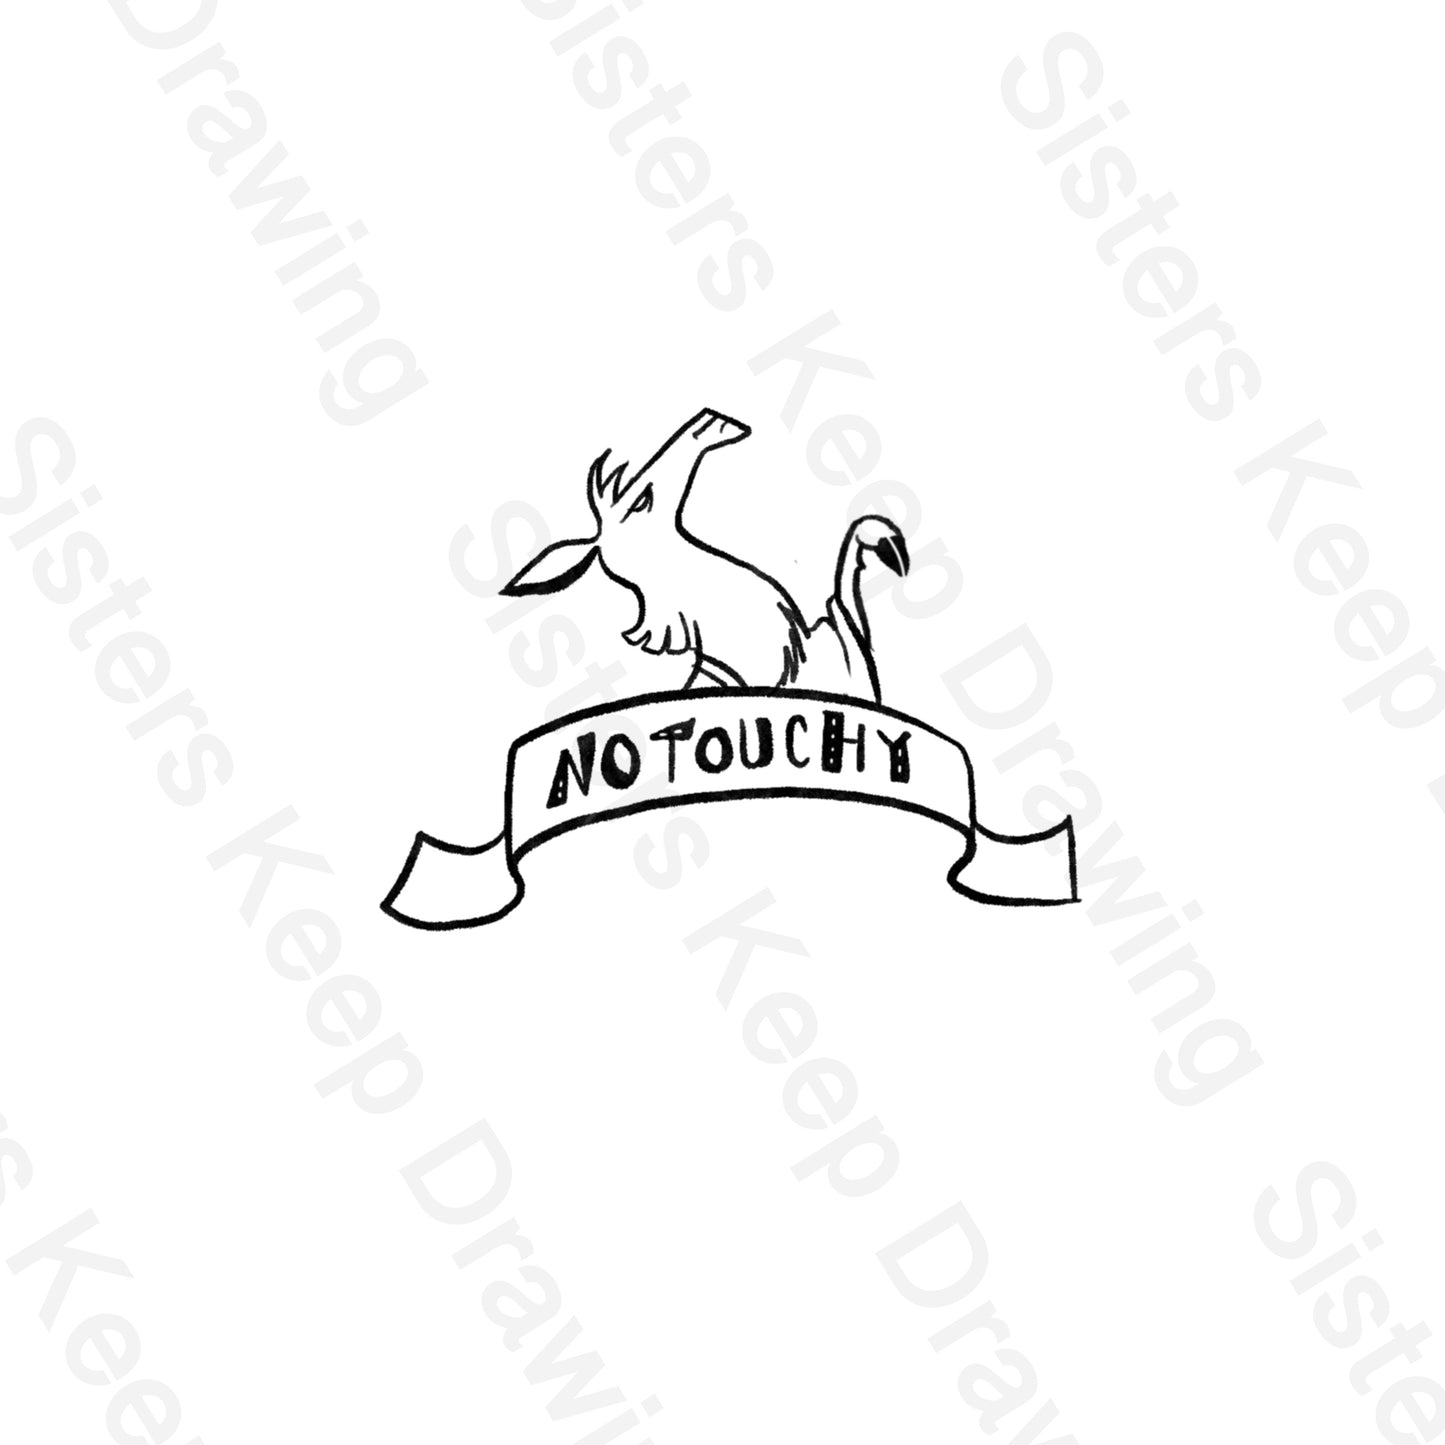 No touchy -Tattoo Transparent Permission PNG- instant download digital printable ar